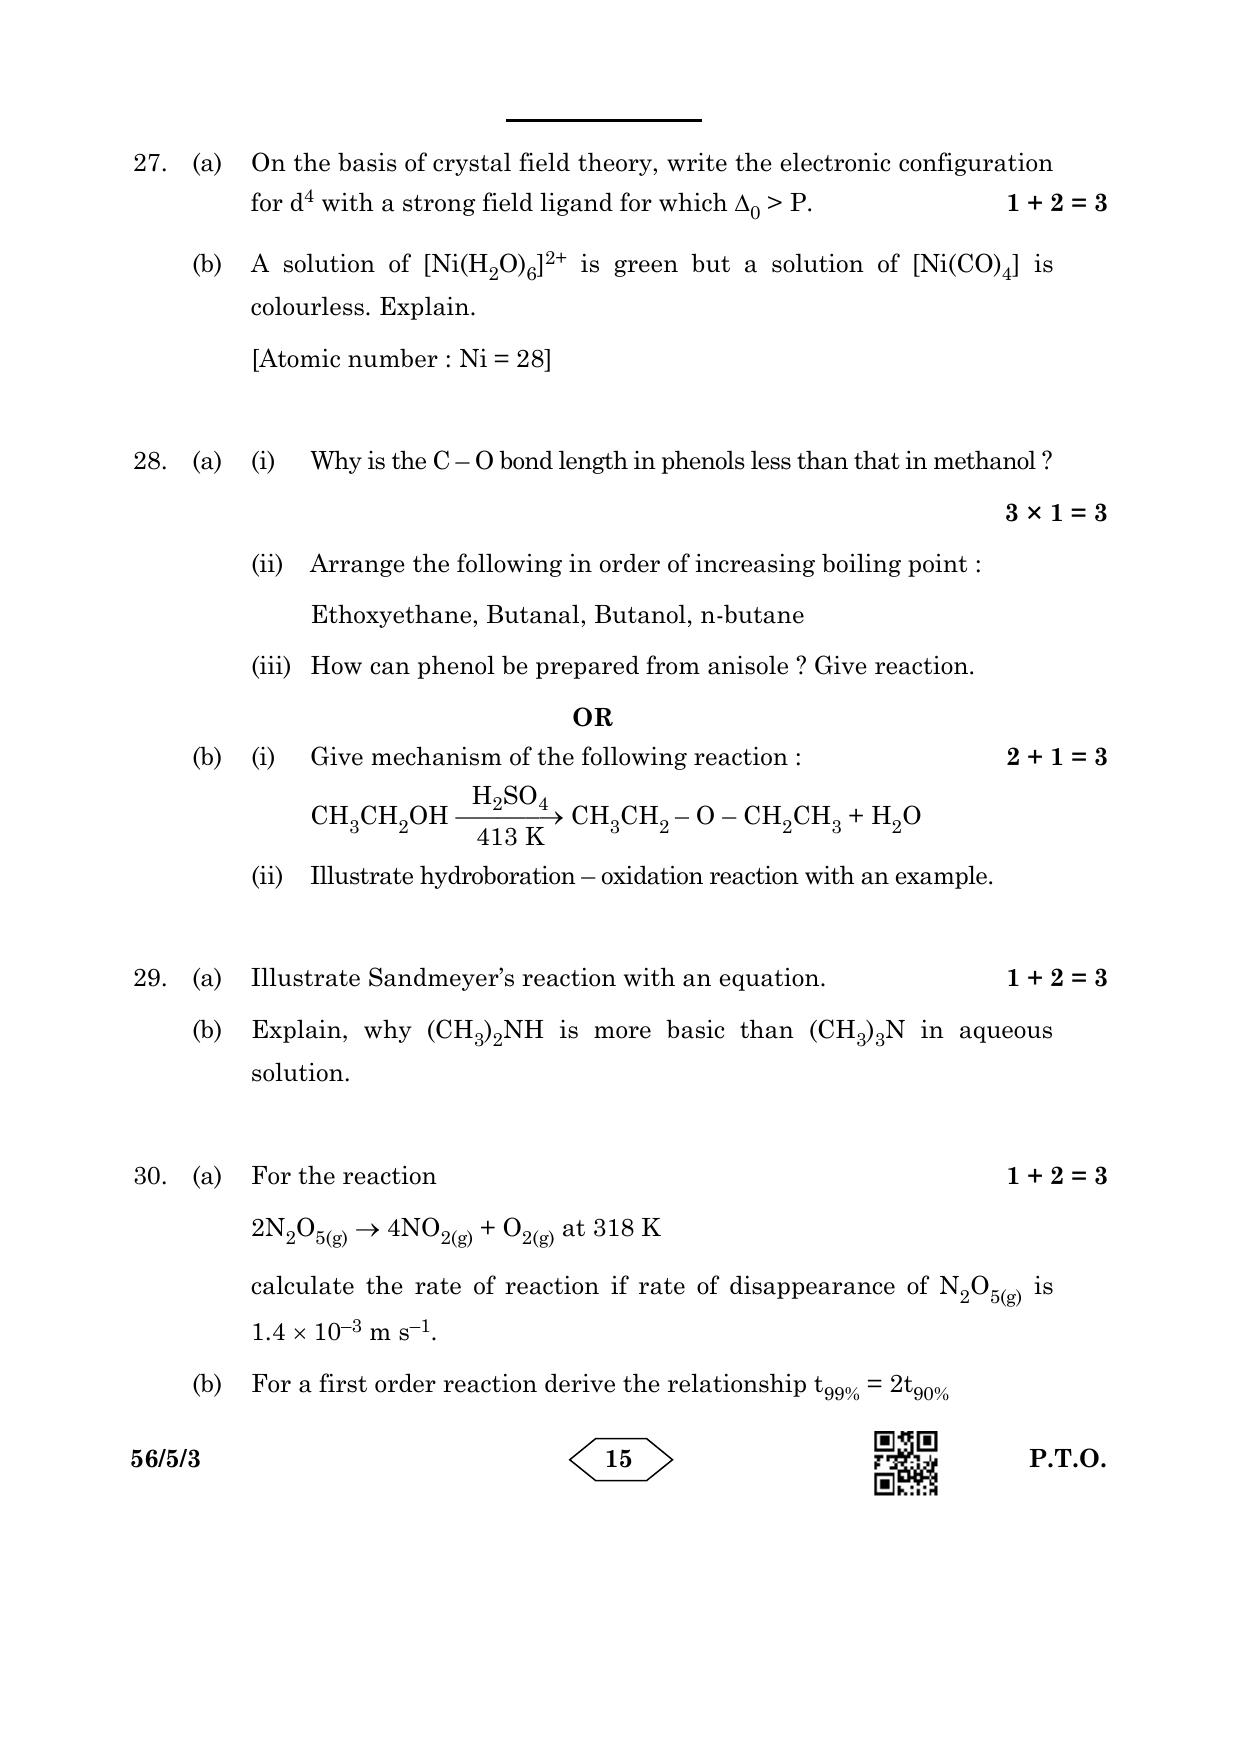 CBSE Class 12 56-5-3 Chemistry 2023 Question Paper - Page 15